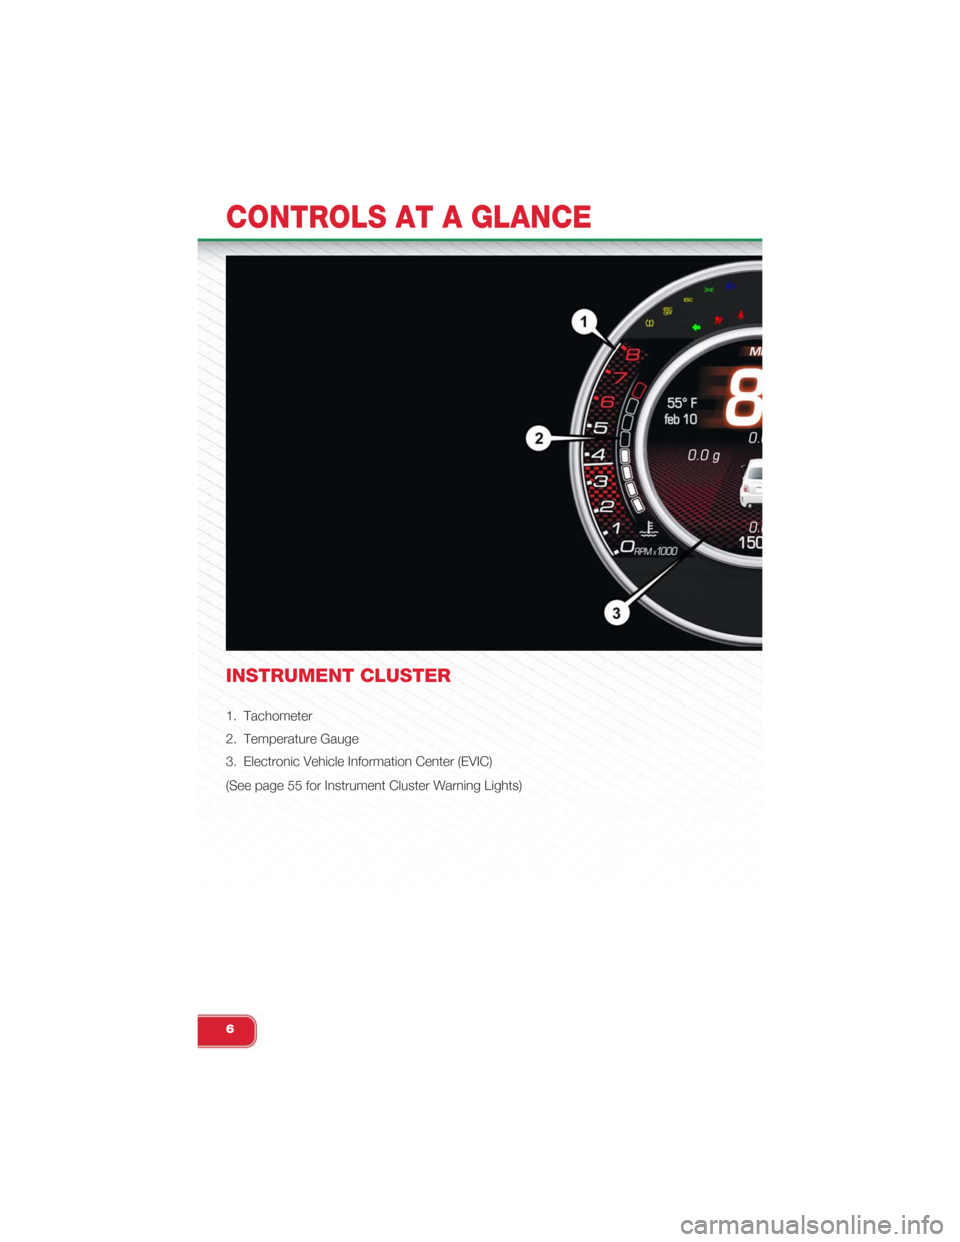 FIAT 500 ABARTH 2015 2.G User Guide INSTRUMENT CLUSTER
1. Tachometer
2. Temperature Gauge
3. Electronic Vehicle Information Center (EVIC)
(See page 55 for Instrument Cluster Warning Lights)
CONTROLS AT A GLANCE
6 